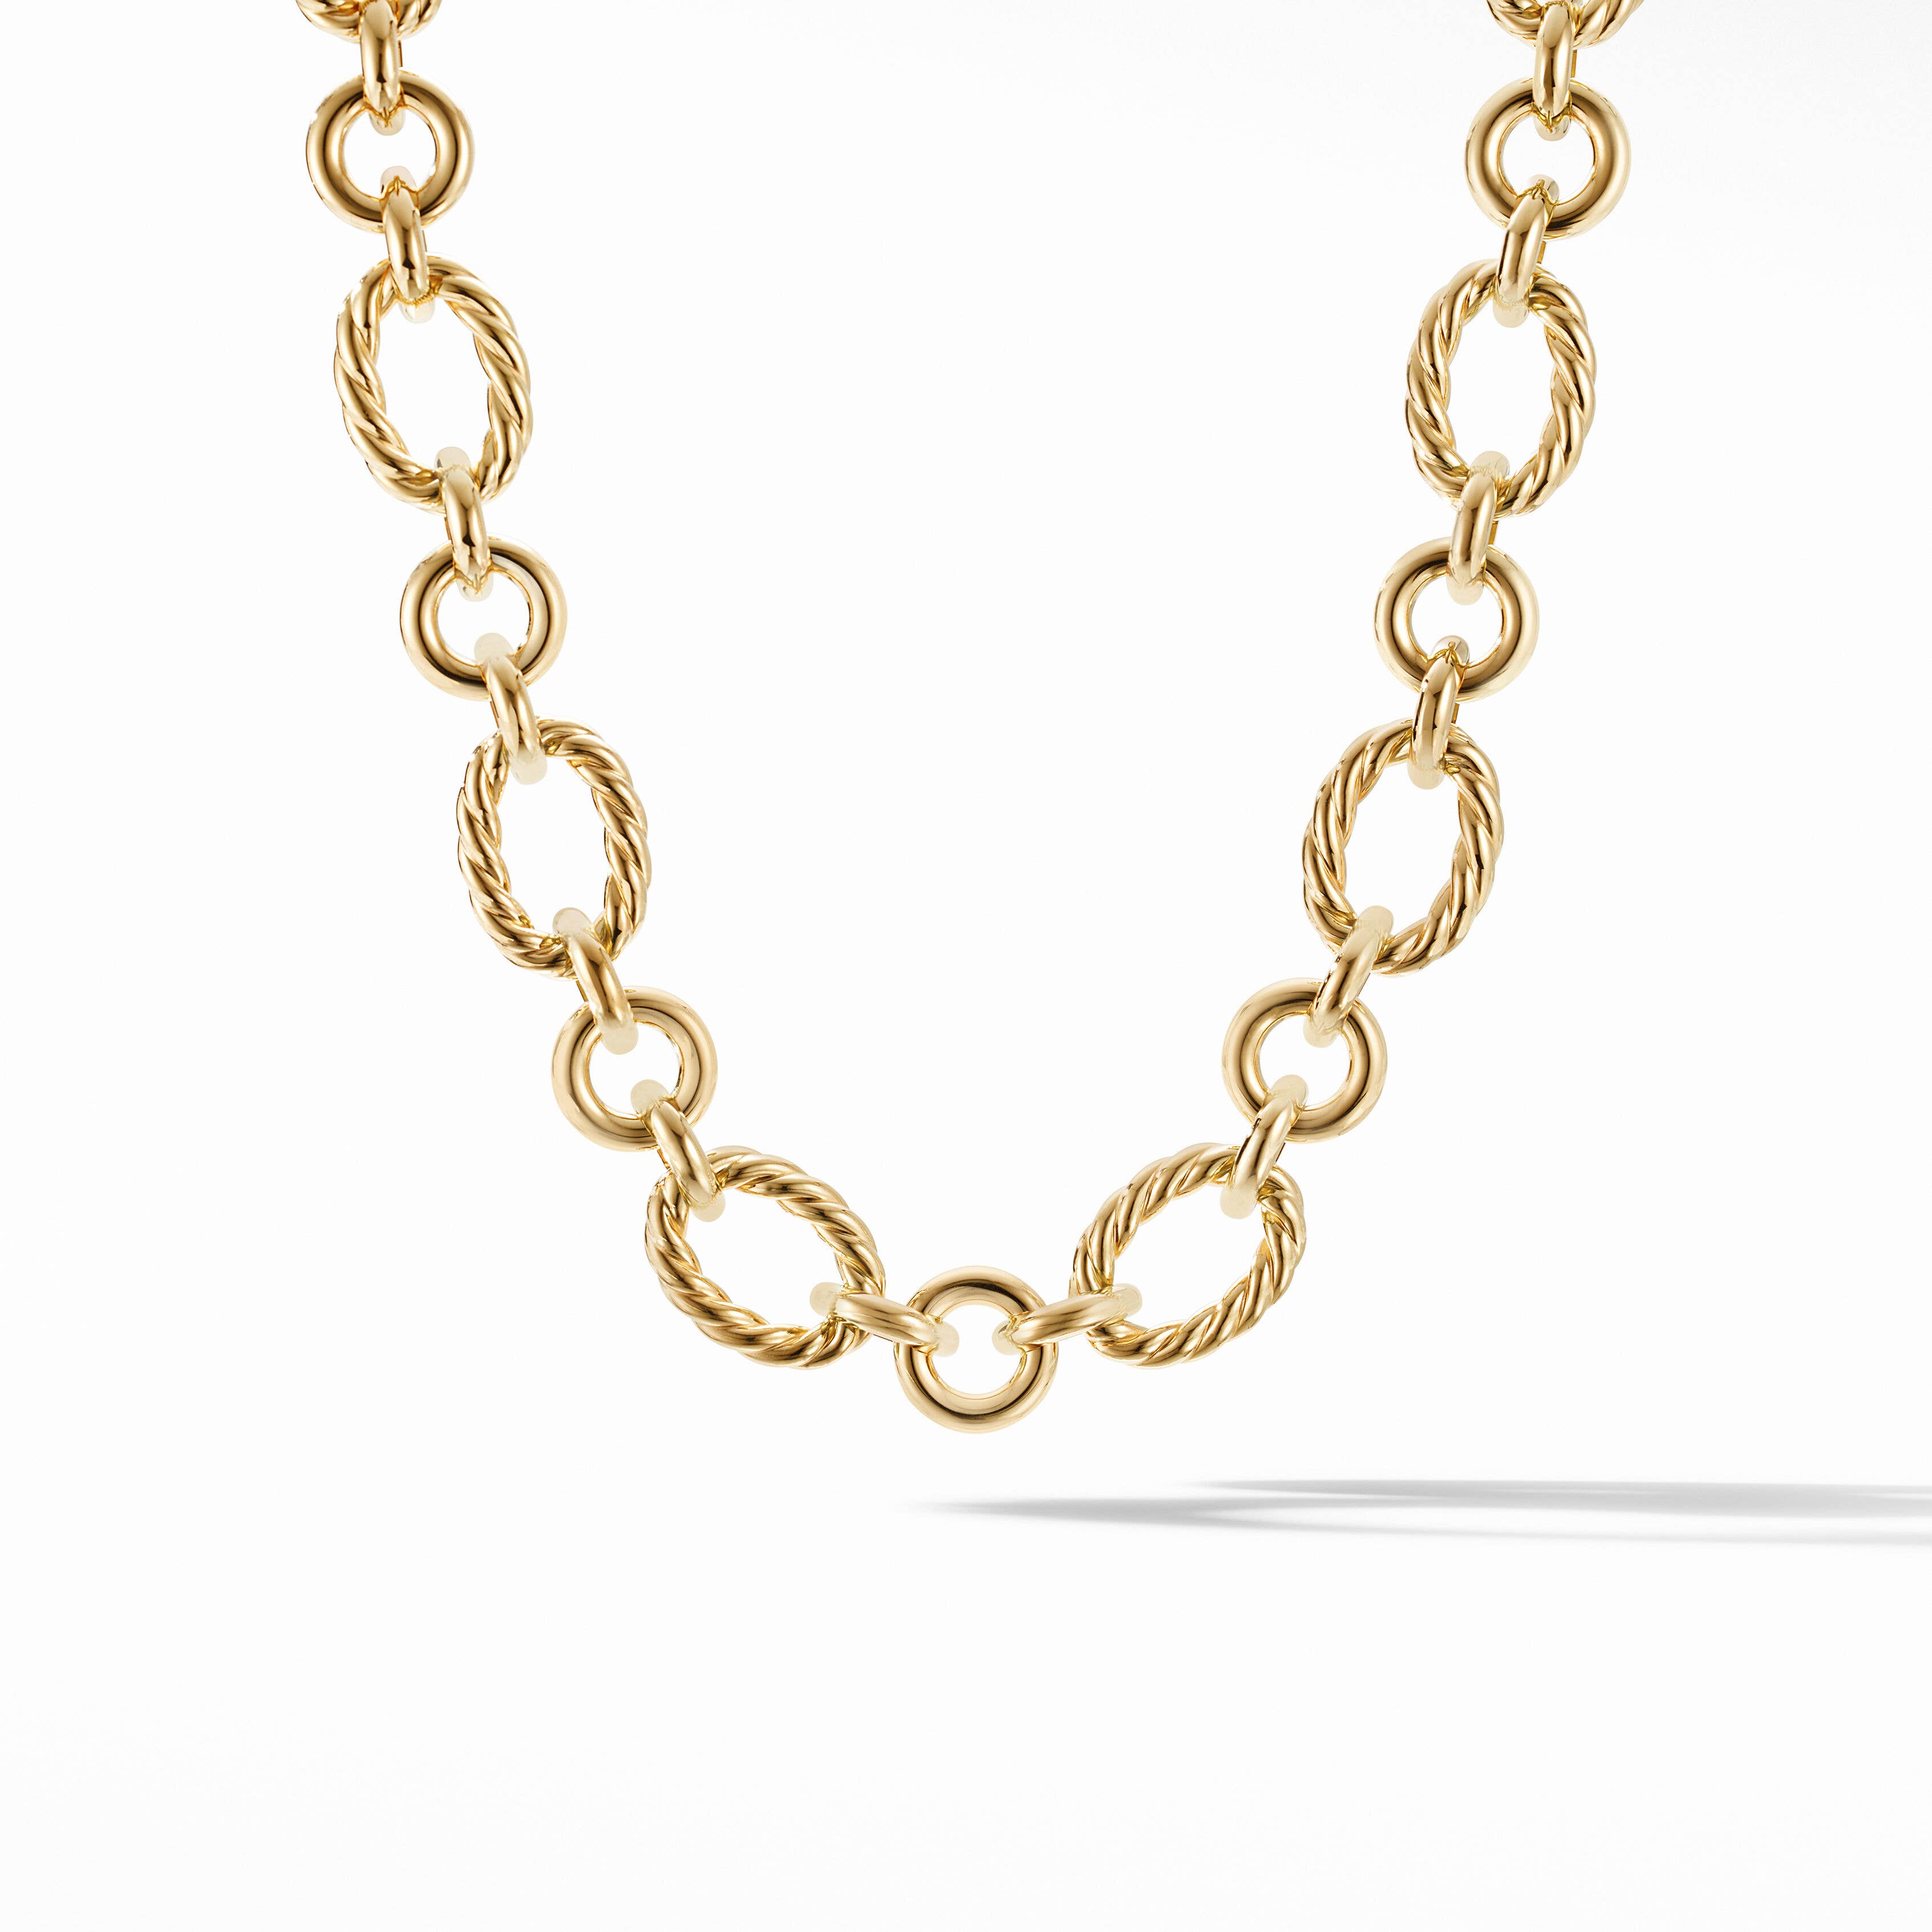 Cable and Smooth Chain Link Necklace in 18K Yellow Gold